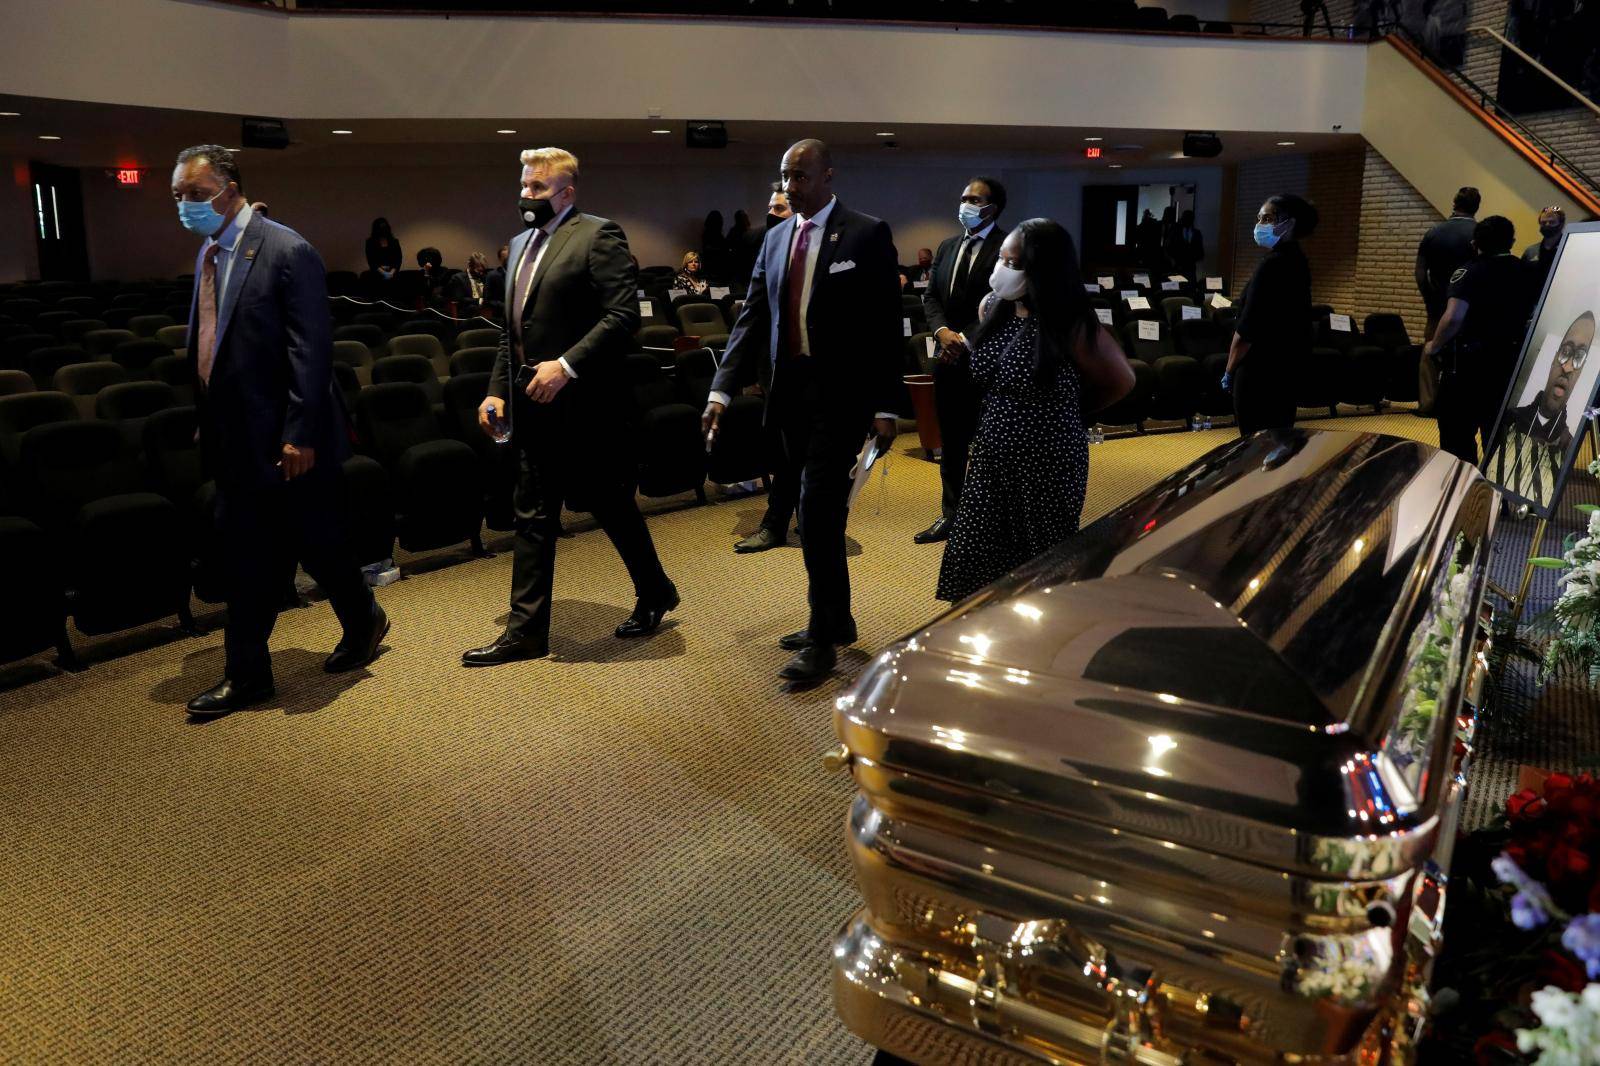 Civil rights activist Reverend Jesse Jackson are seen during a memorial service for George Floyd following his death in Minneapolis police custody, in Minneapolis, in Minneapolis